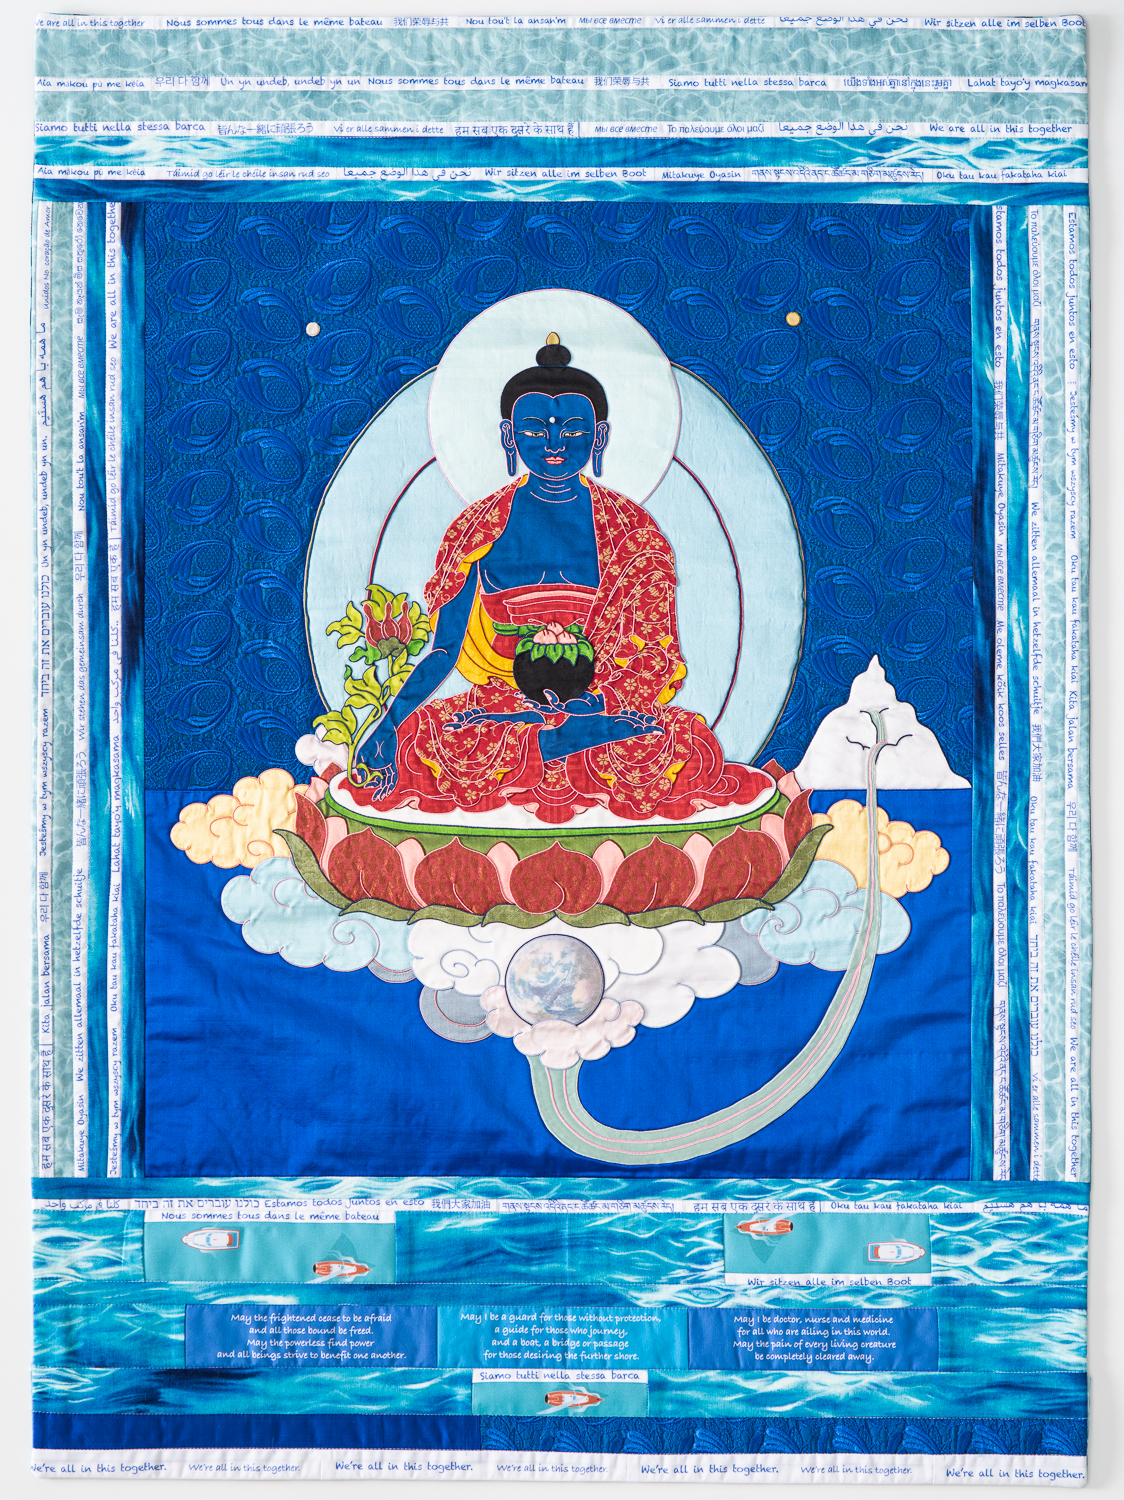 All in This Together, Medicine Buddha thangka quilt by Leslie Rinchen-Wongmo